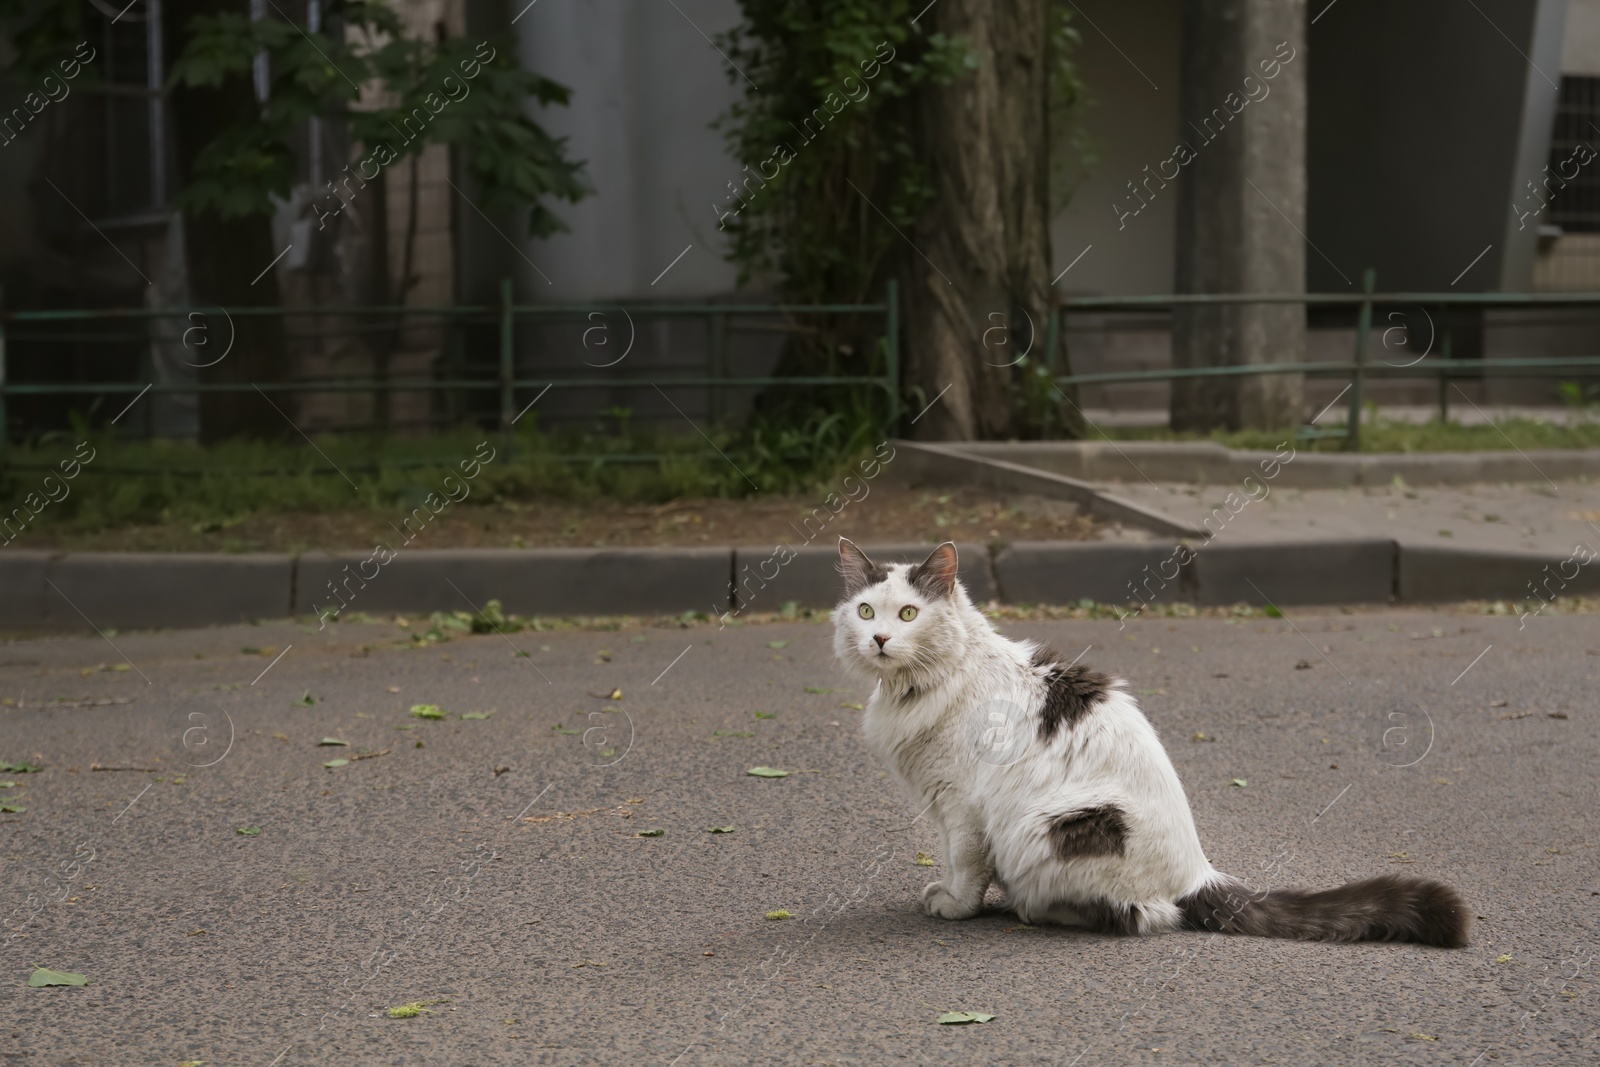 Photo of Lonely stray cat sitting on asphalt road outdoors, space for text